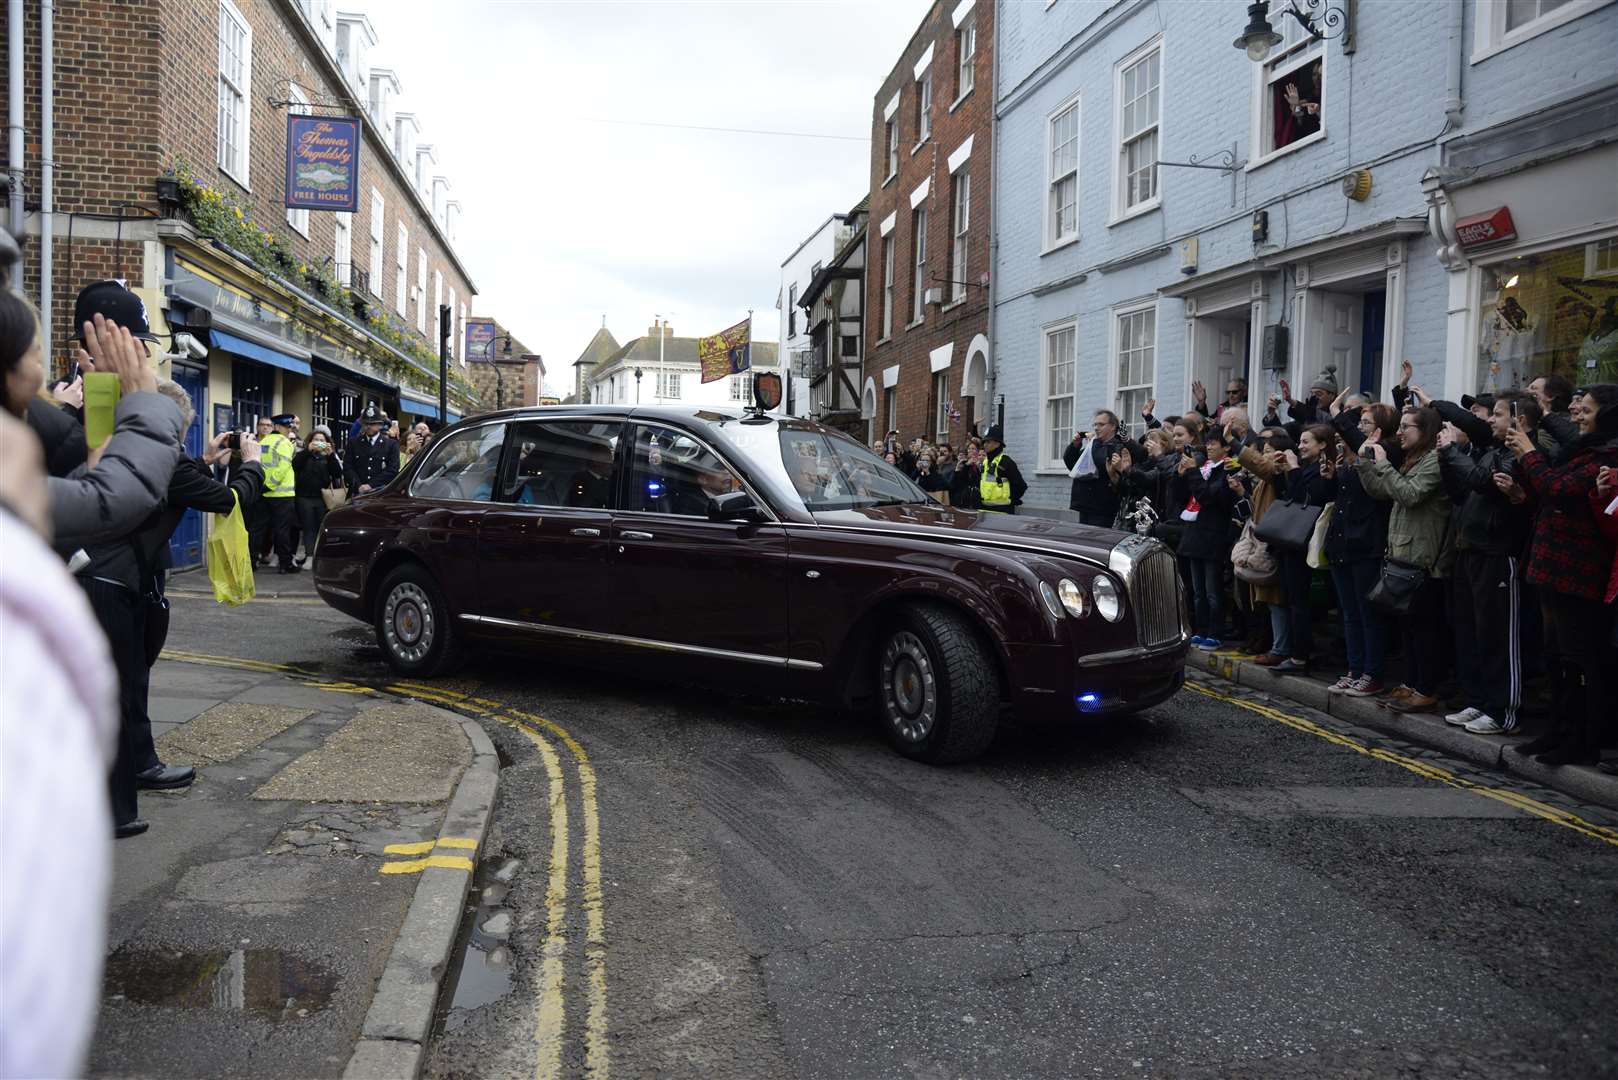 The Queen’s Bentley exiting Cathedral grounds and into Burgate